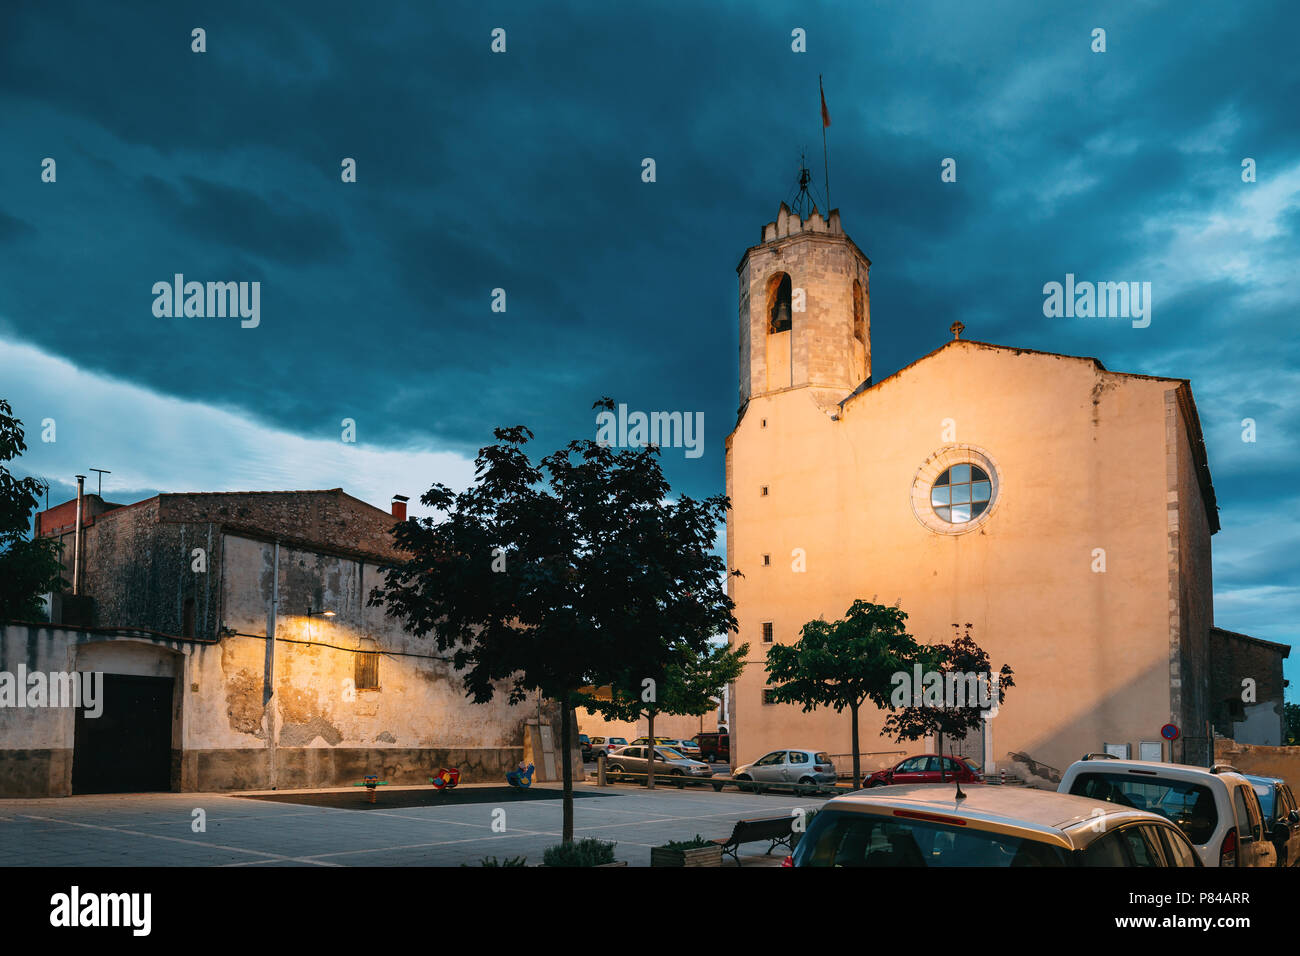 L'Armentera, Girona, Spain. Church Of Our Lady Of Armentera In Summer Evening Night Stock Photo